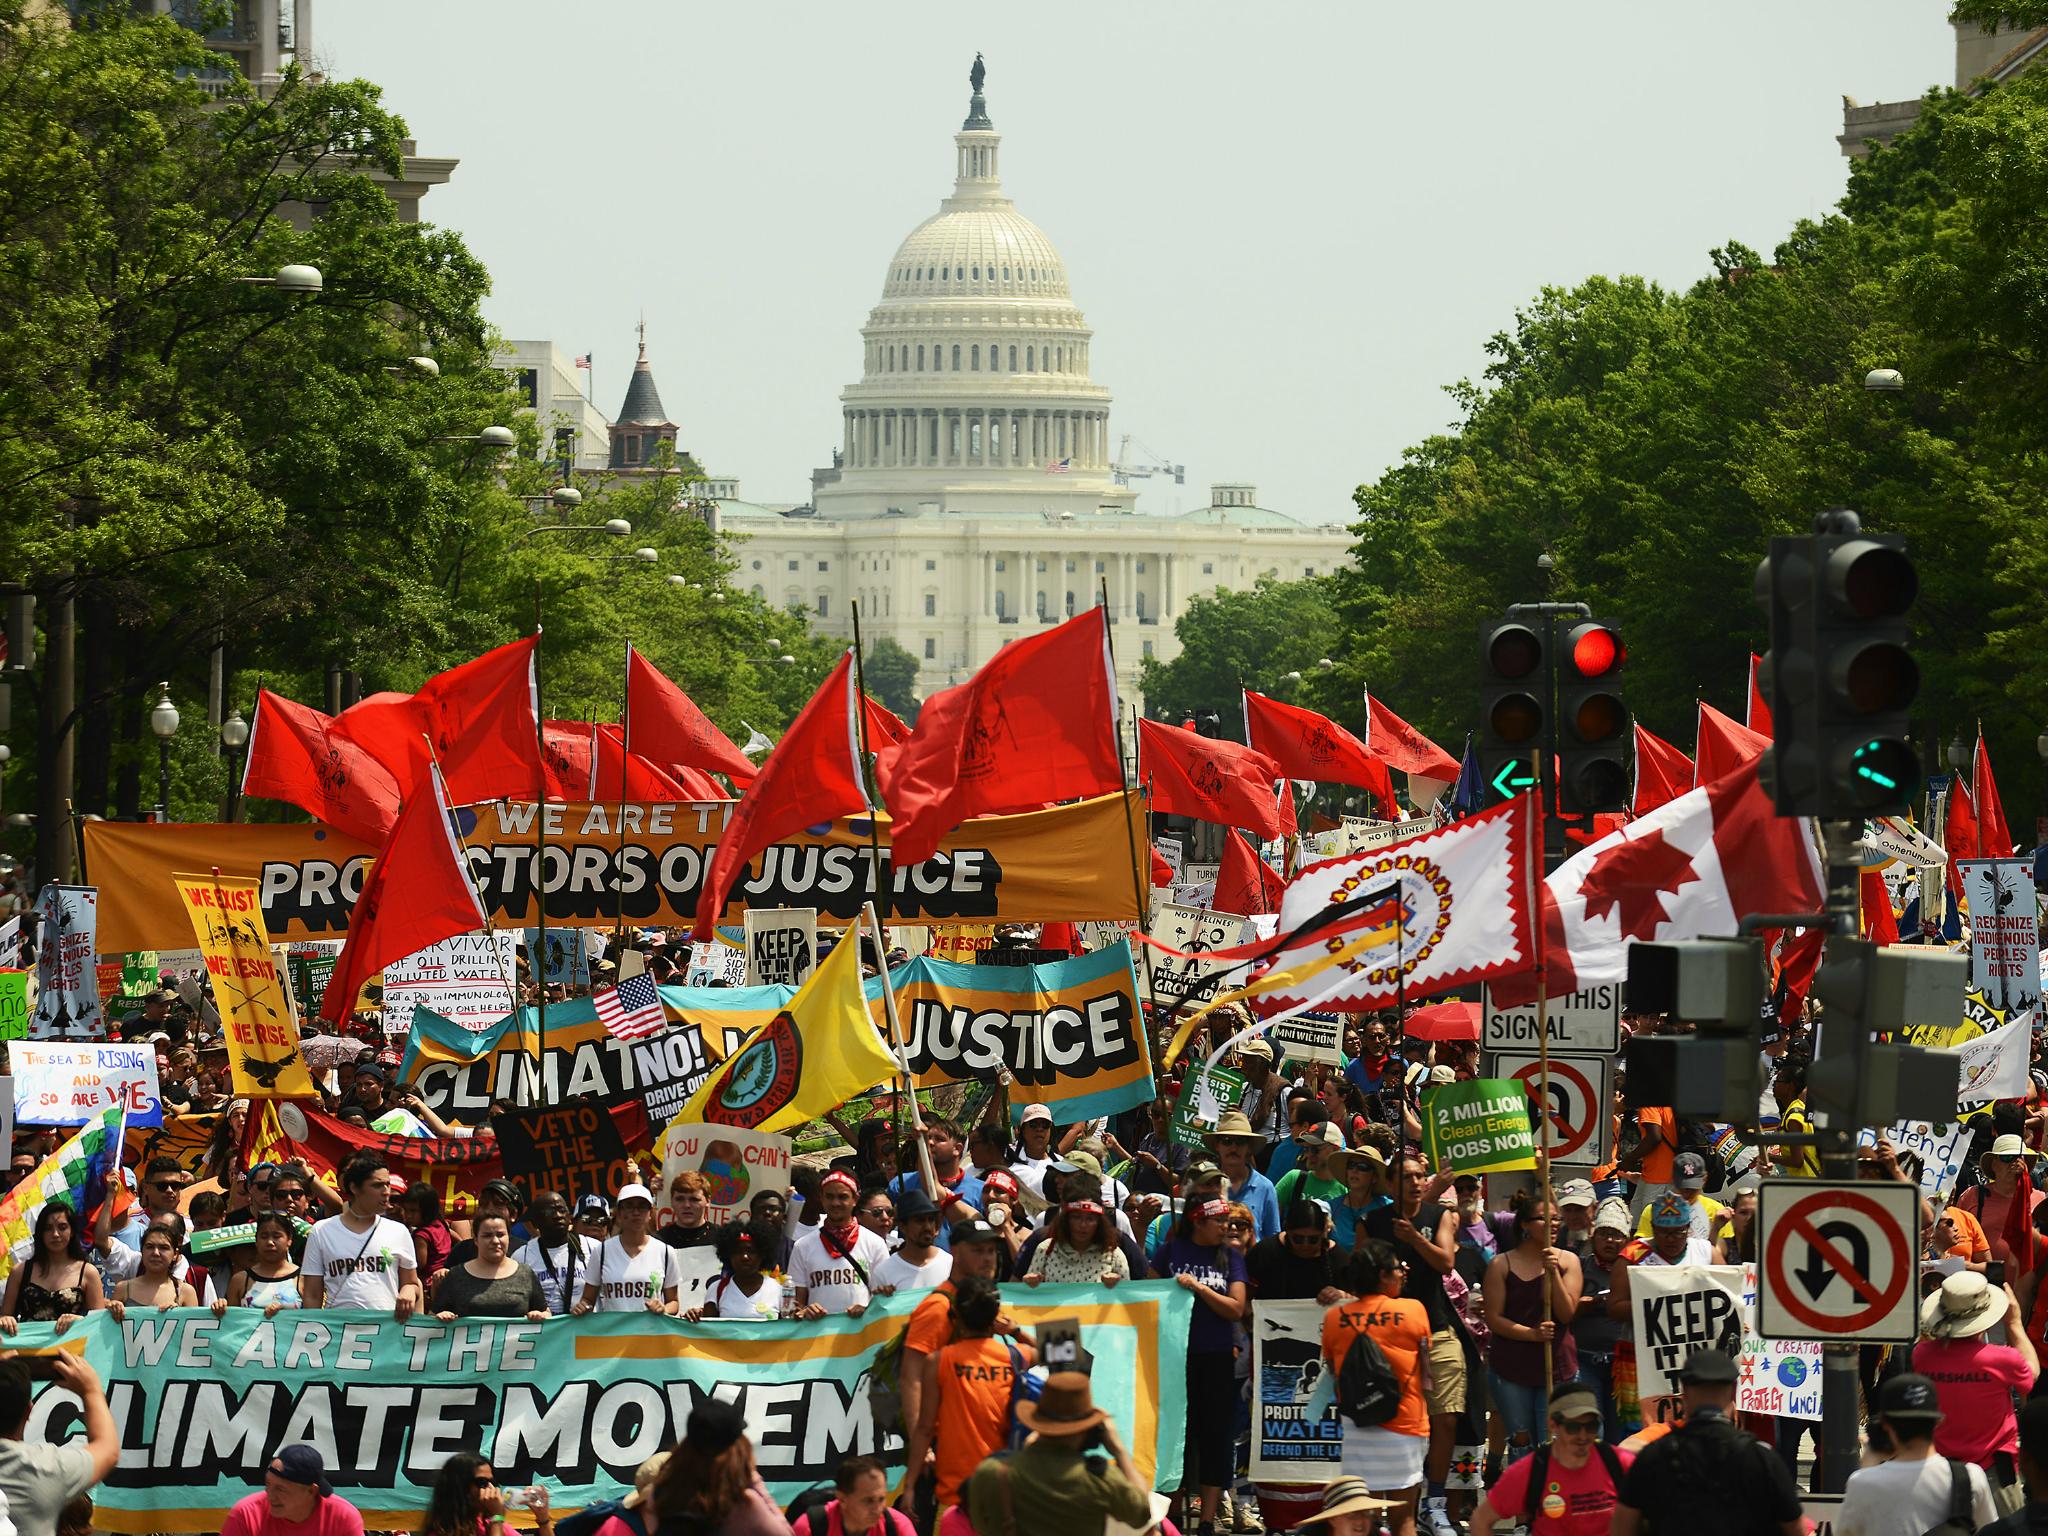 People march from the U.S. Capitol to the White House for the People's Climate Movement to protest President Donald Trump's environmental policies 29 April 2017